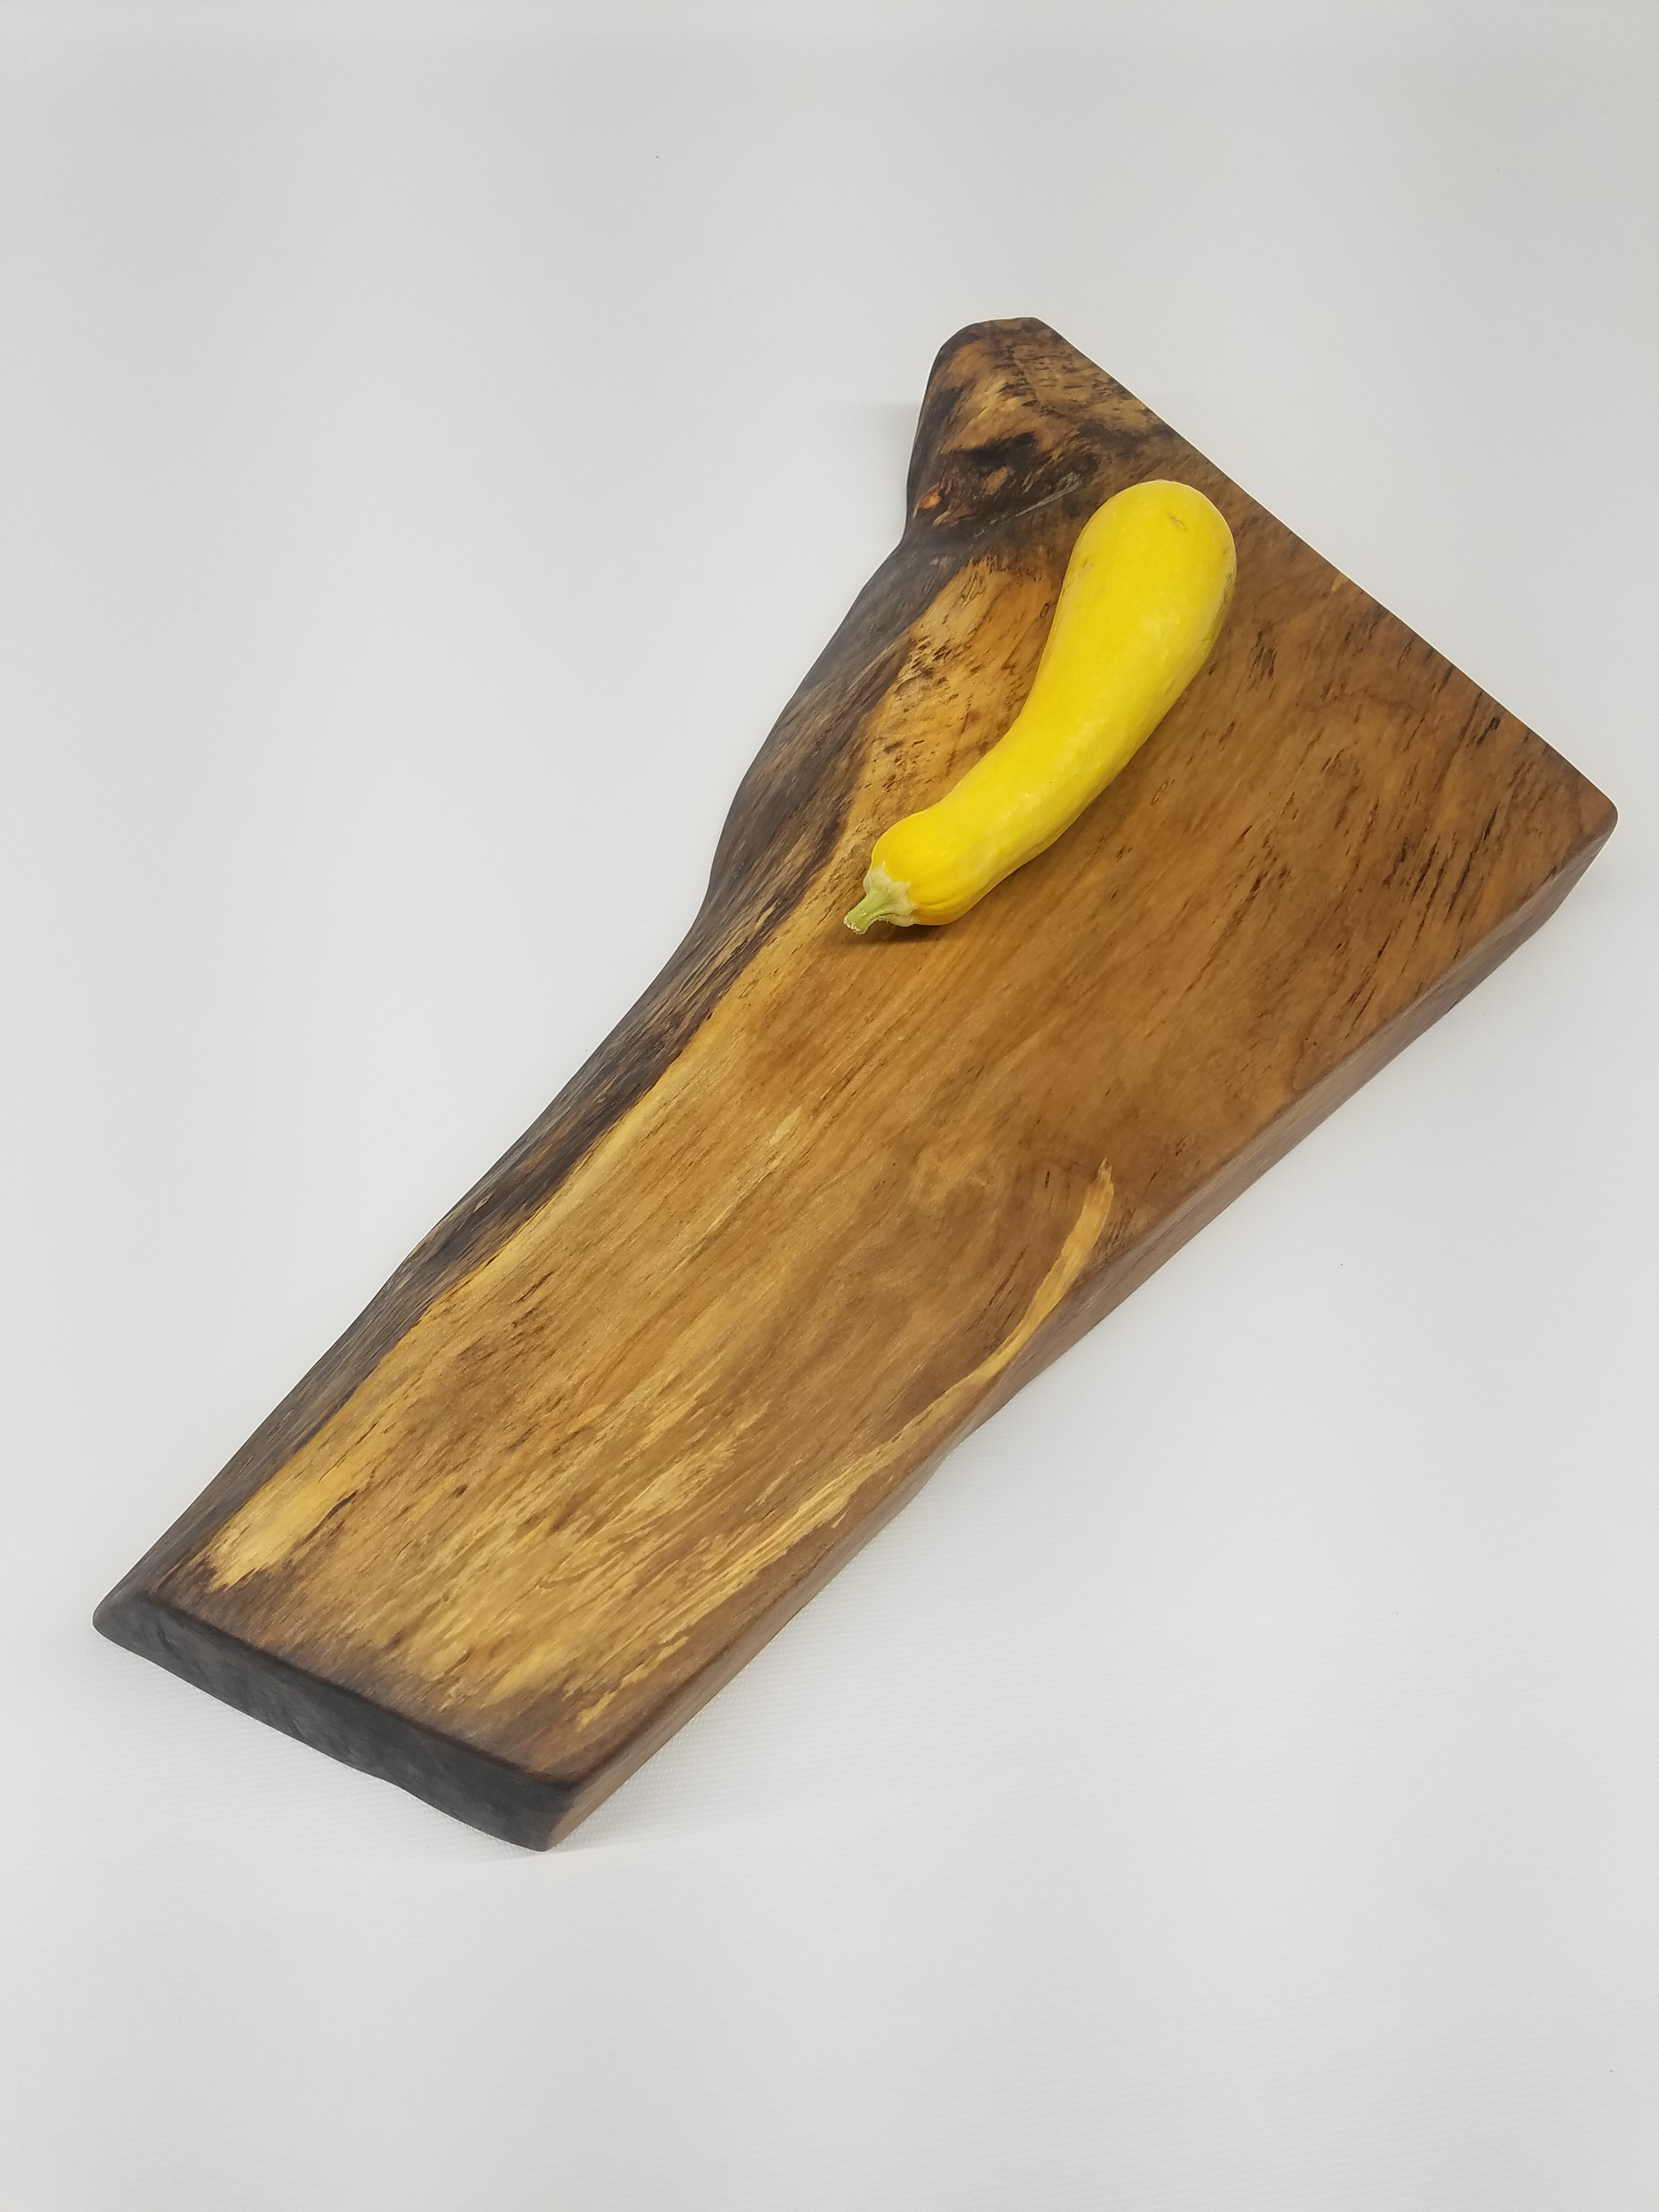 Serving Board- Live Edge Charcuterie Board- Dining- Cheese Board- Cutting Board- Natural Wood Server- Platter- Maple- Sushi Plate- Gift